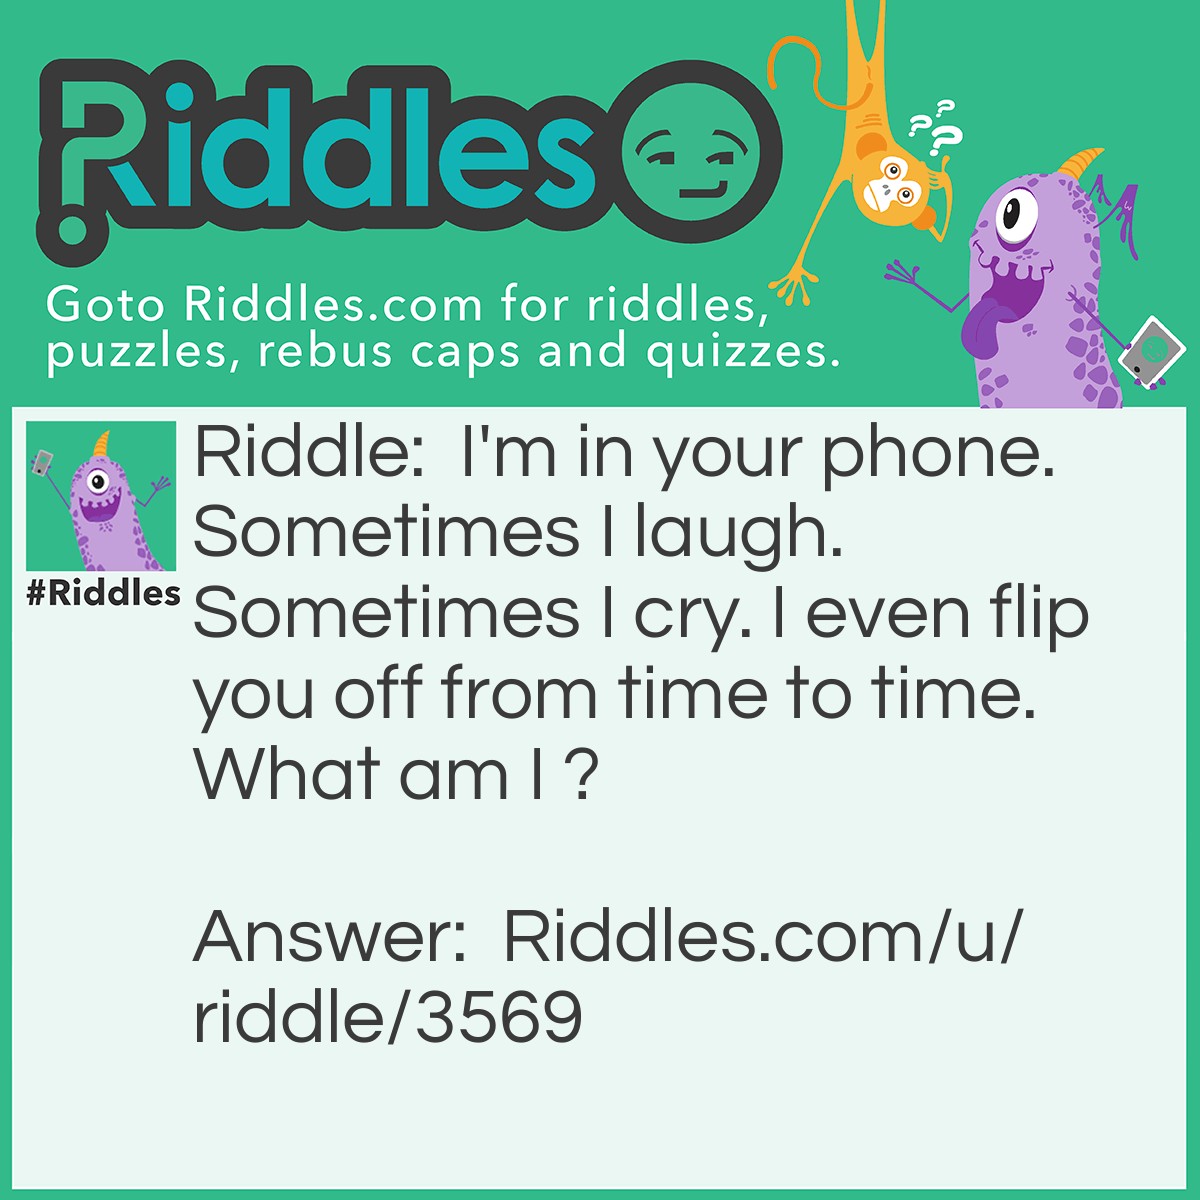 Riddle: I'm in your phone. Sometimes I laugh. Sometimes I cry. I even flip you off from time to time. What am I ? Answer: An emoji.